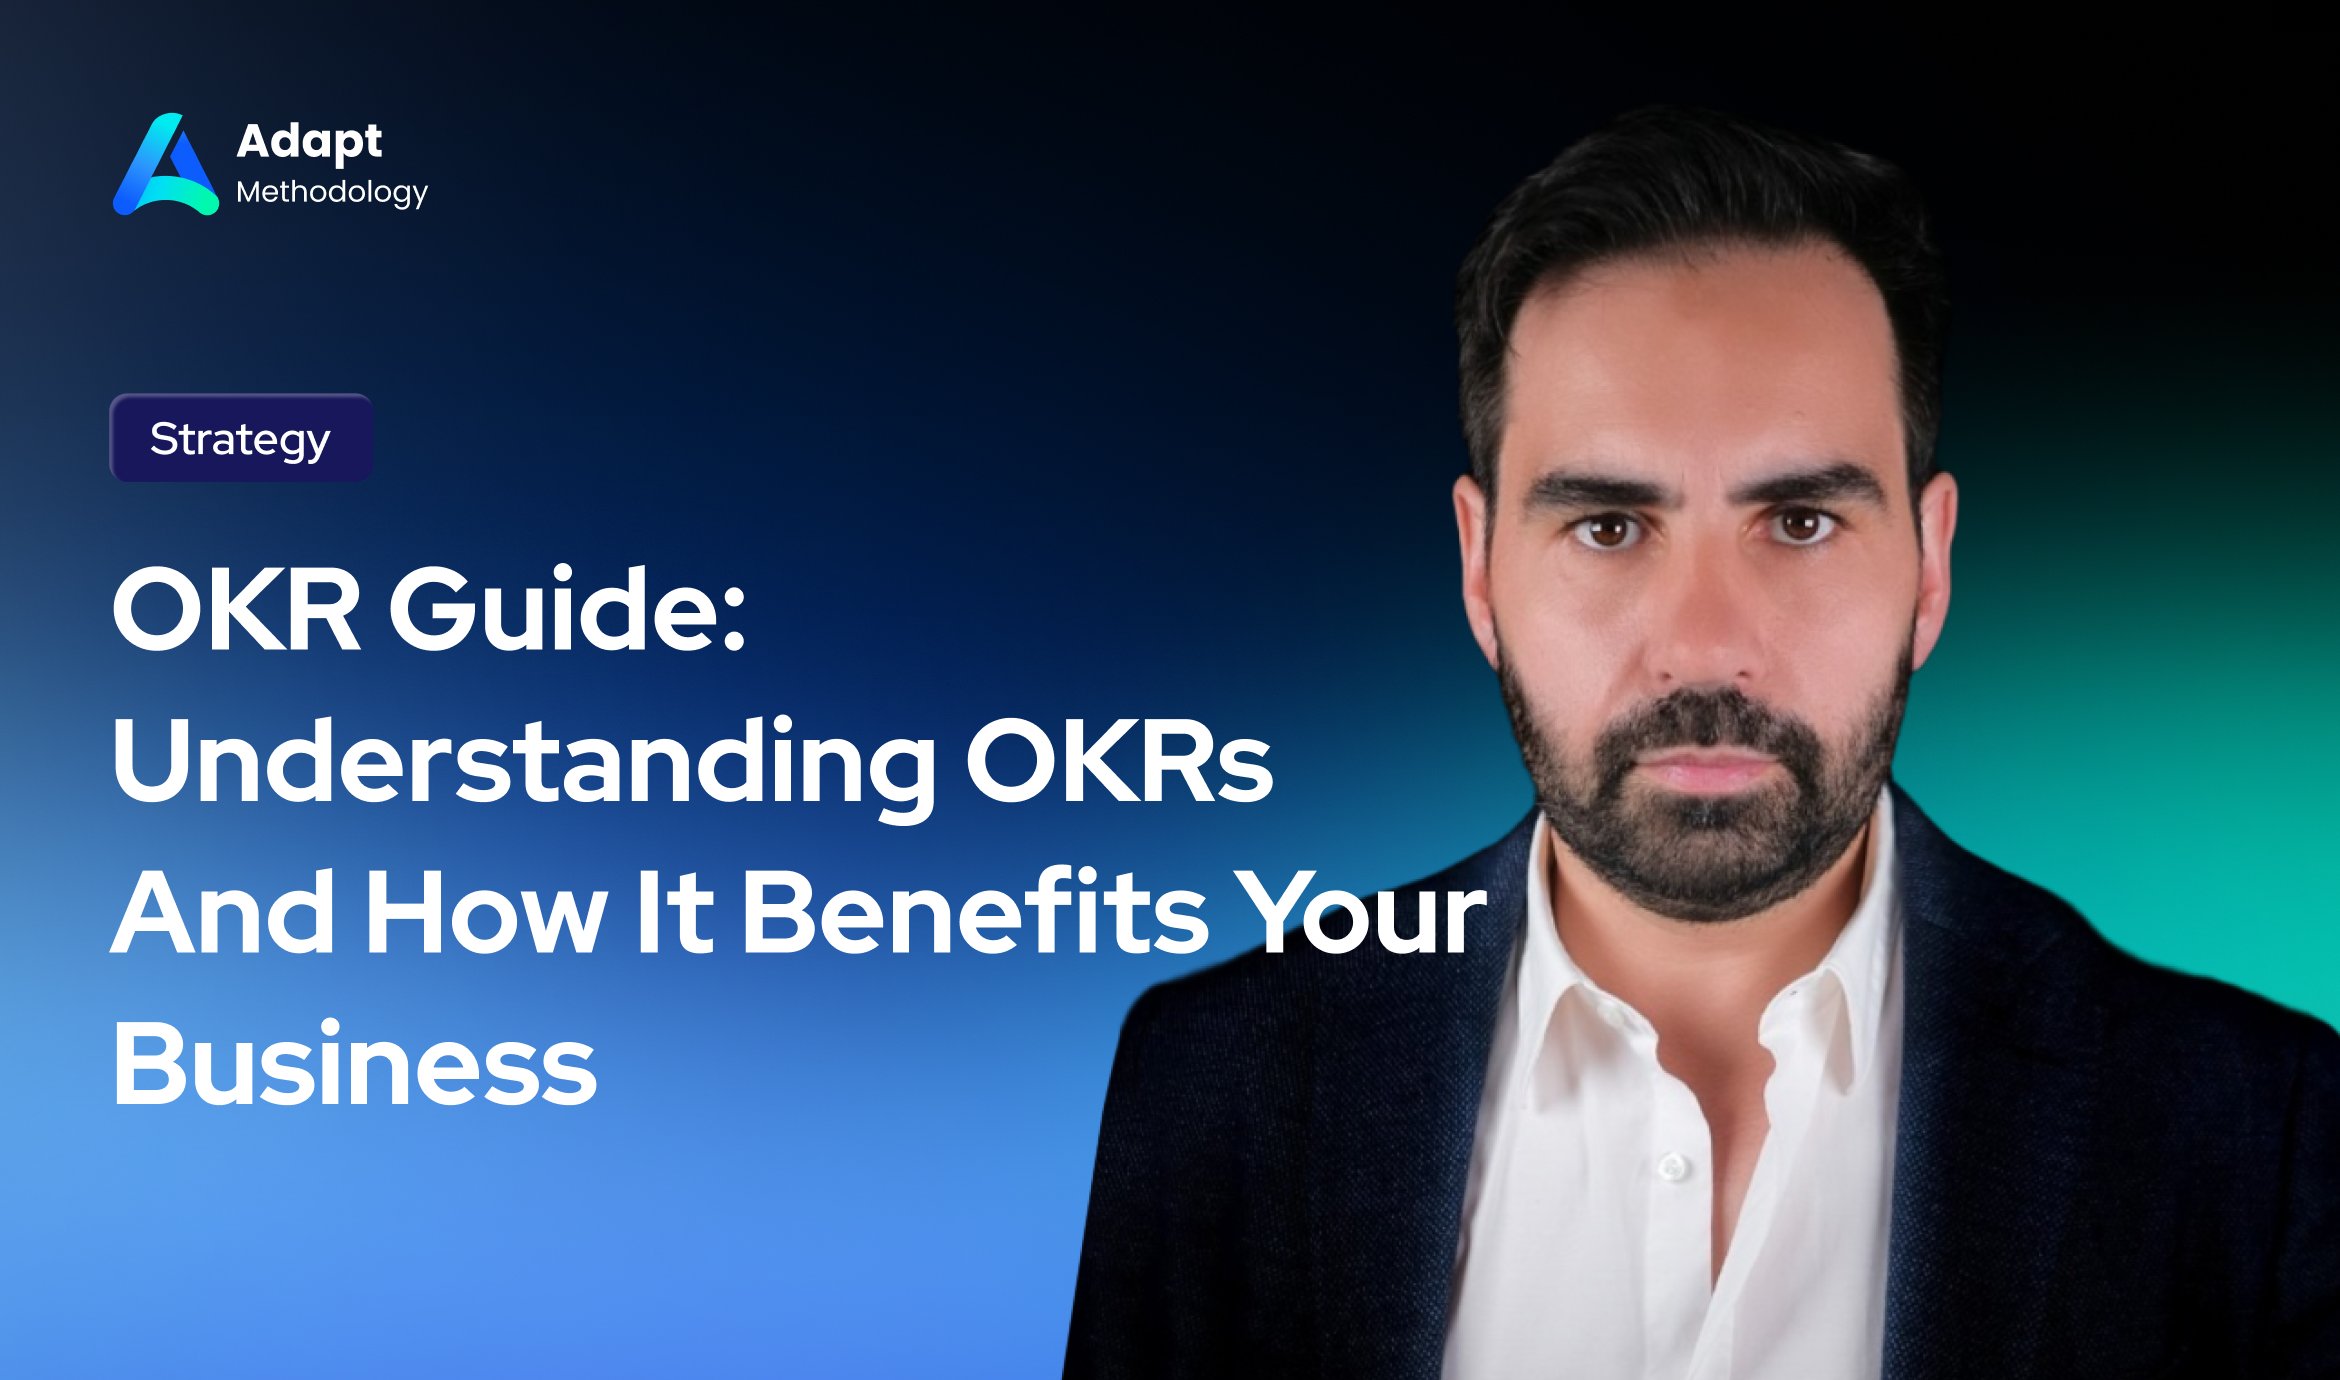 OKR Guide - Understanding OKRs and How It Benefits Your Business